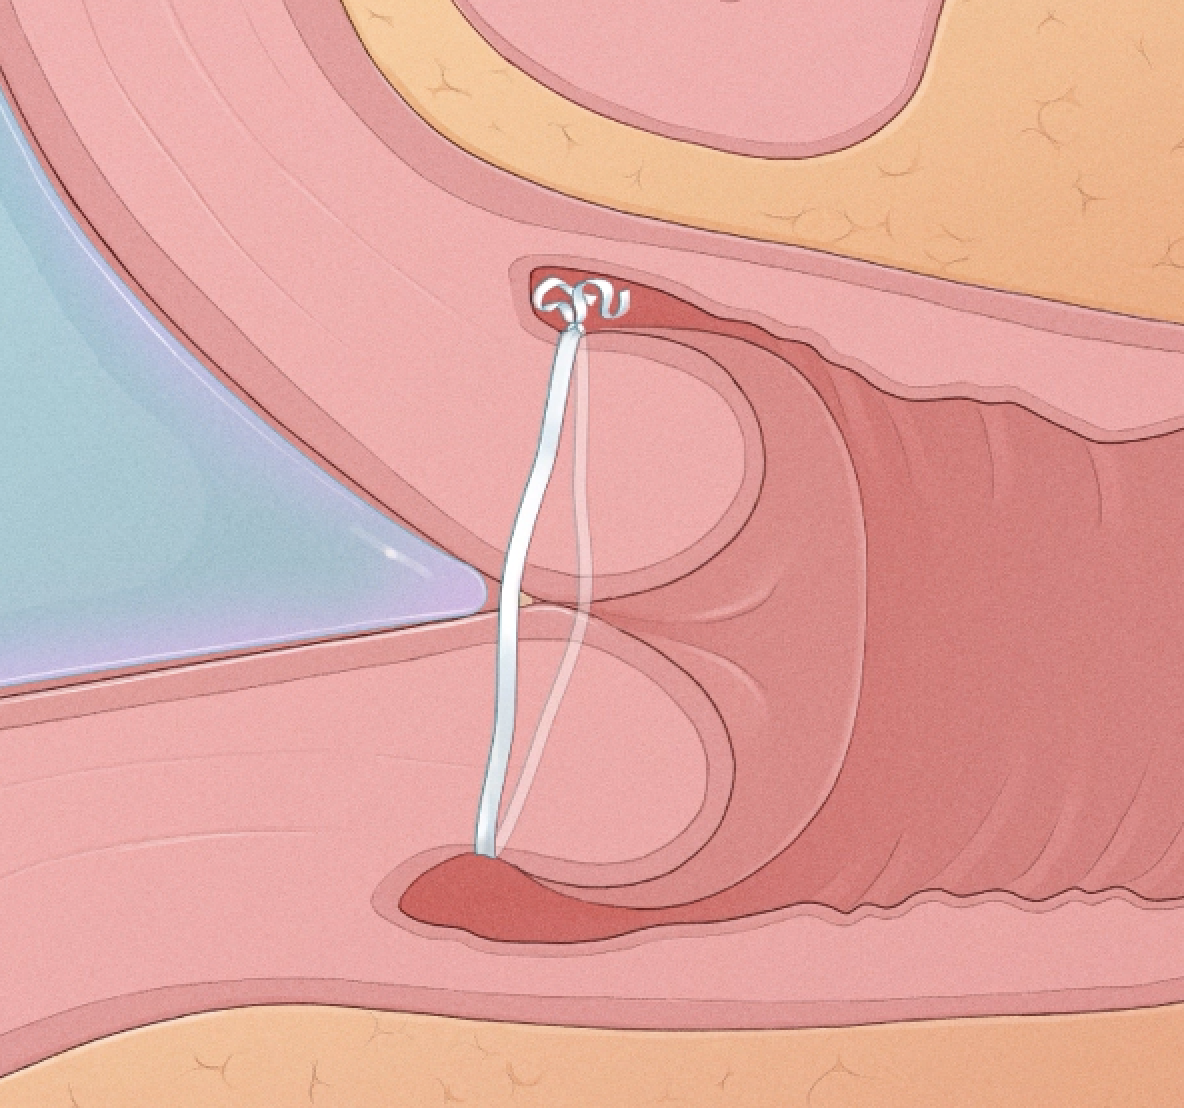 A cervix held closed by cerclage